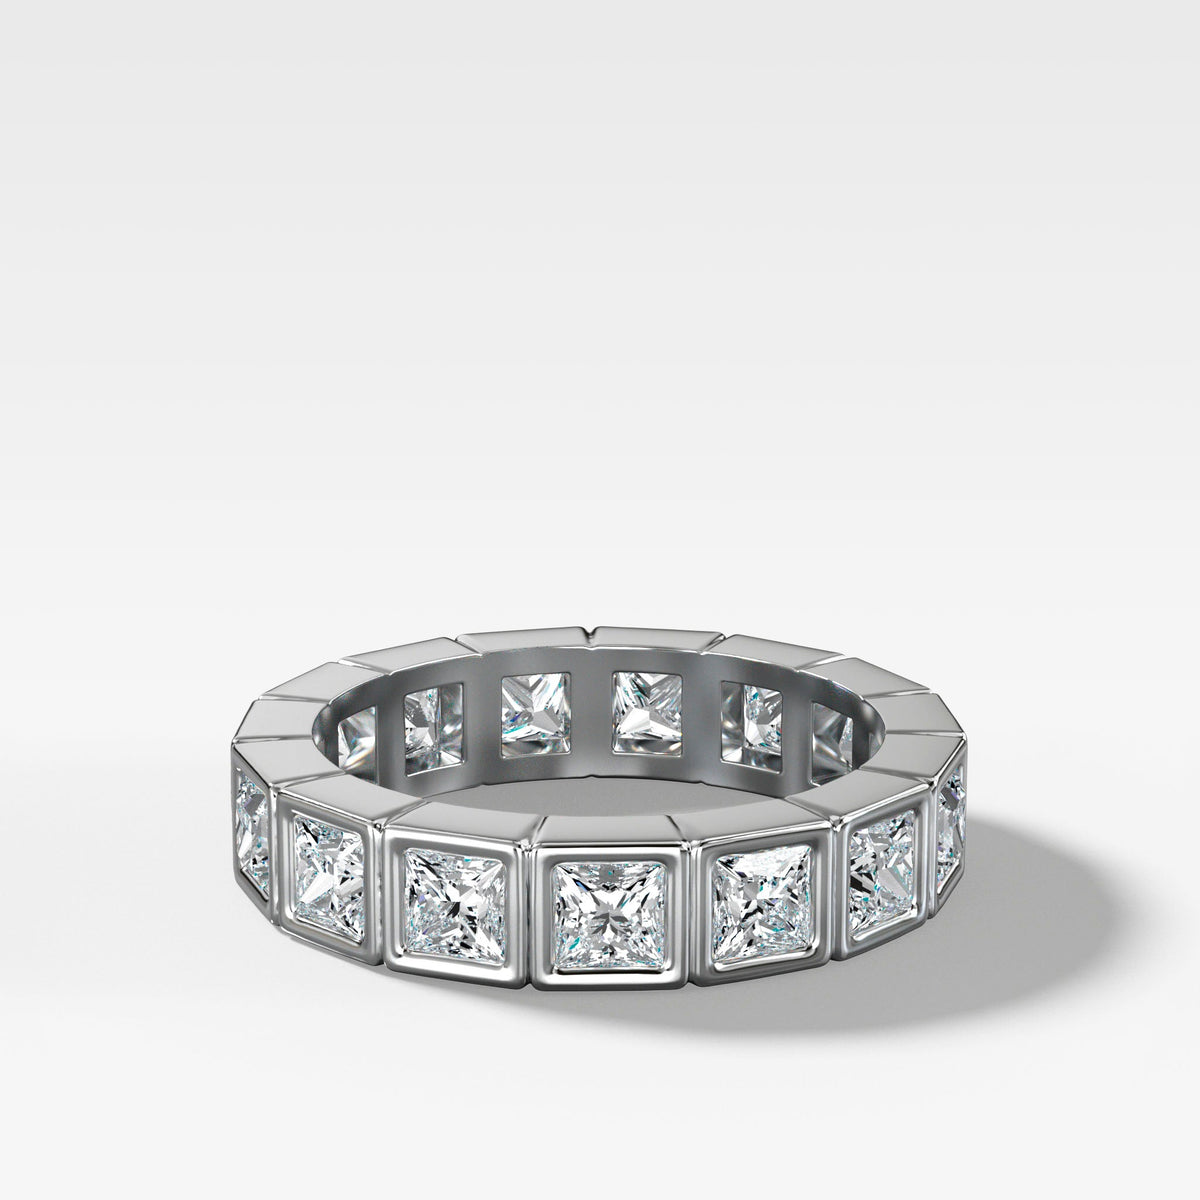 Bezel Set Eternity Band With Princess Cuts in White Gold by Good Stone